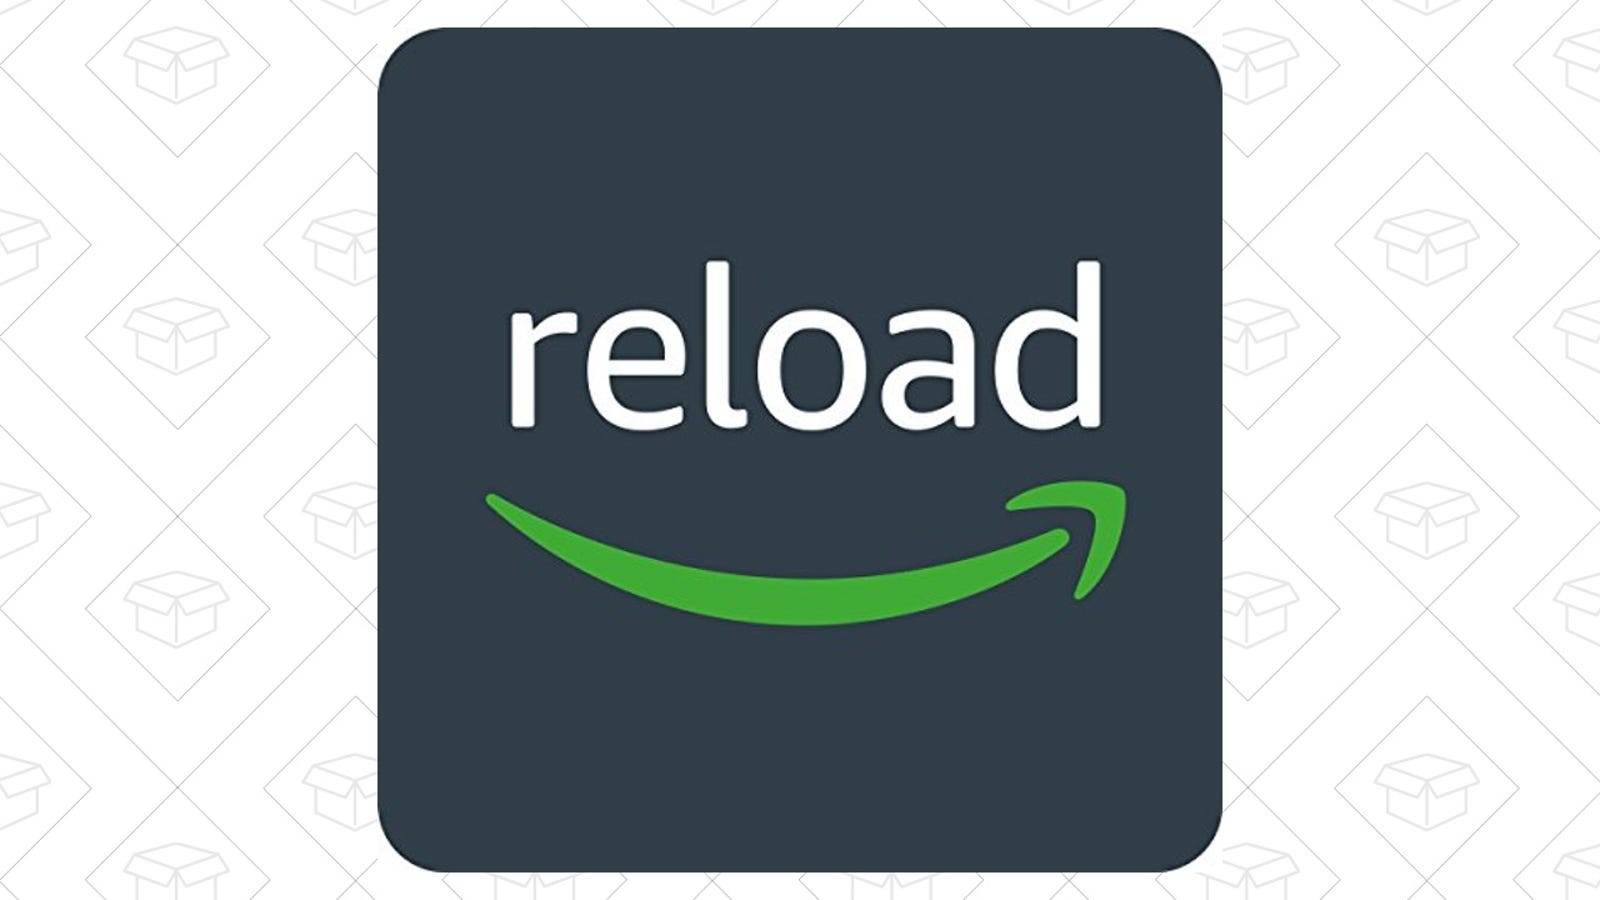 Reload Your Amazon Gift Card Account With 100, Get 10 Free